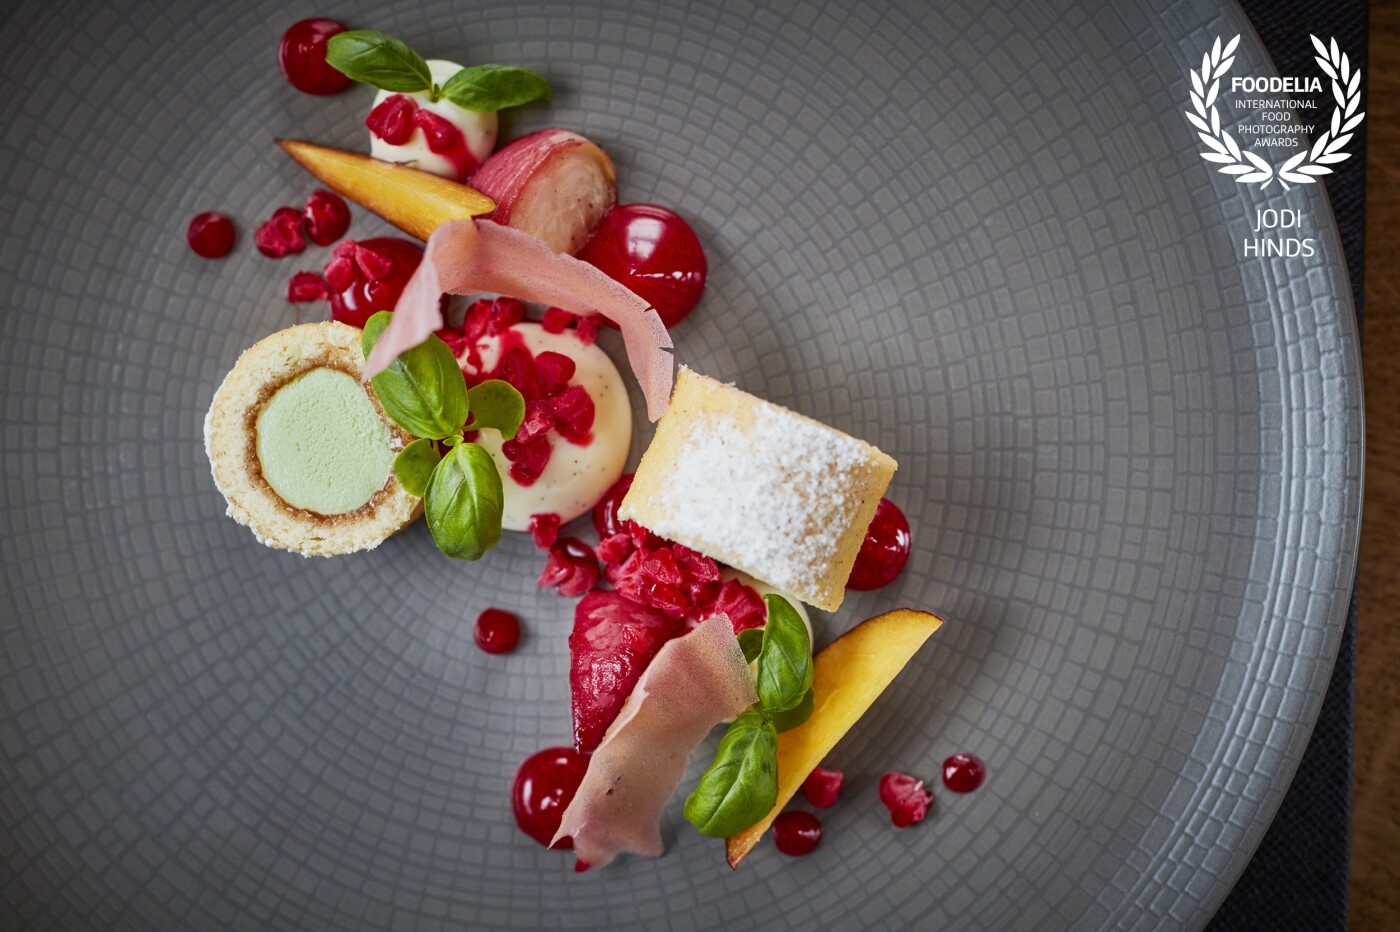 Summer deserts from the talented kitchen @simpsons_restaurant<br />
Arctic roll, raspberry, white chocolate, peach<br />
Chefs: @luke.tipping @chunk86 @franbrella<br />
Restaurant: @simpsons_restaurant<br />
Photographer: @jodihindsphoto